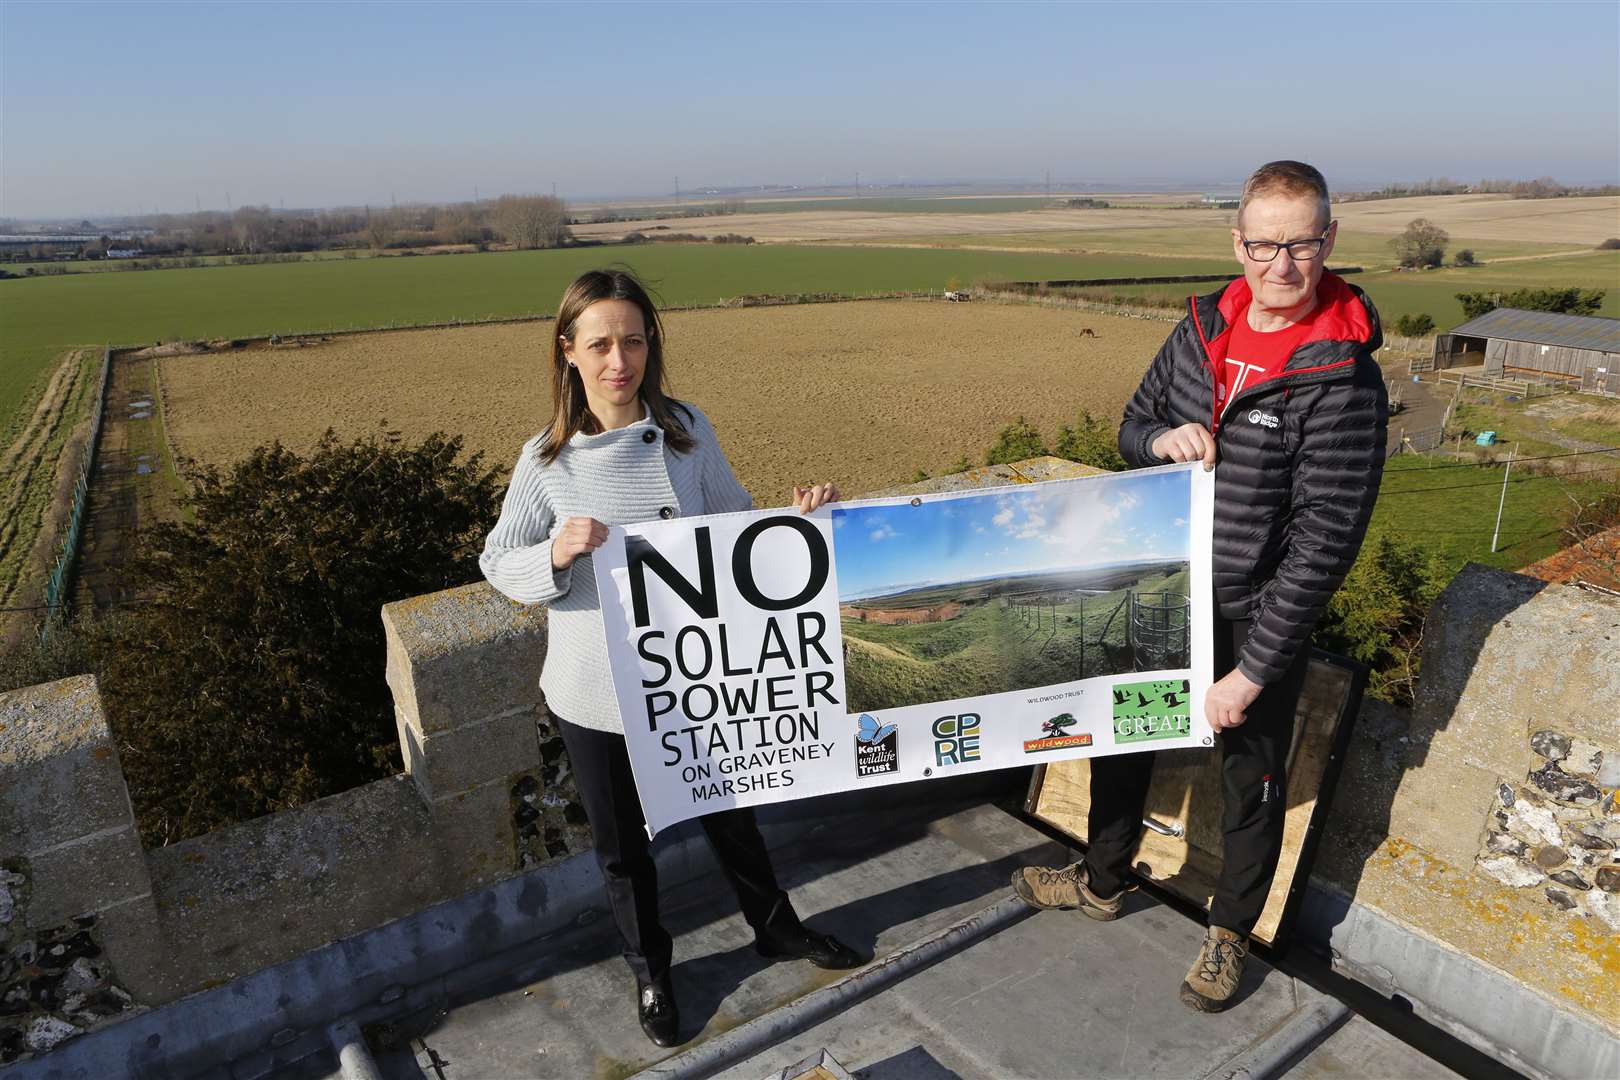 Helen Whately is against the solar farm proposals